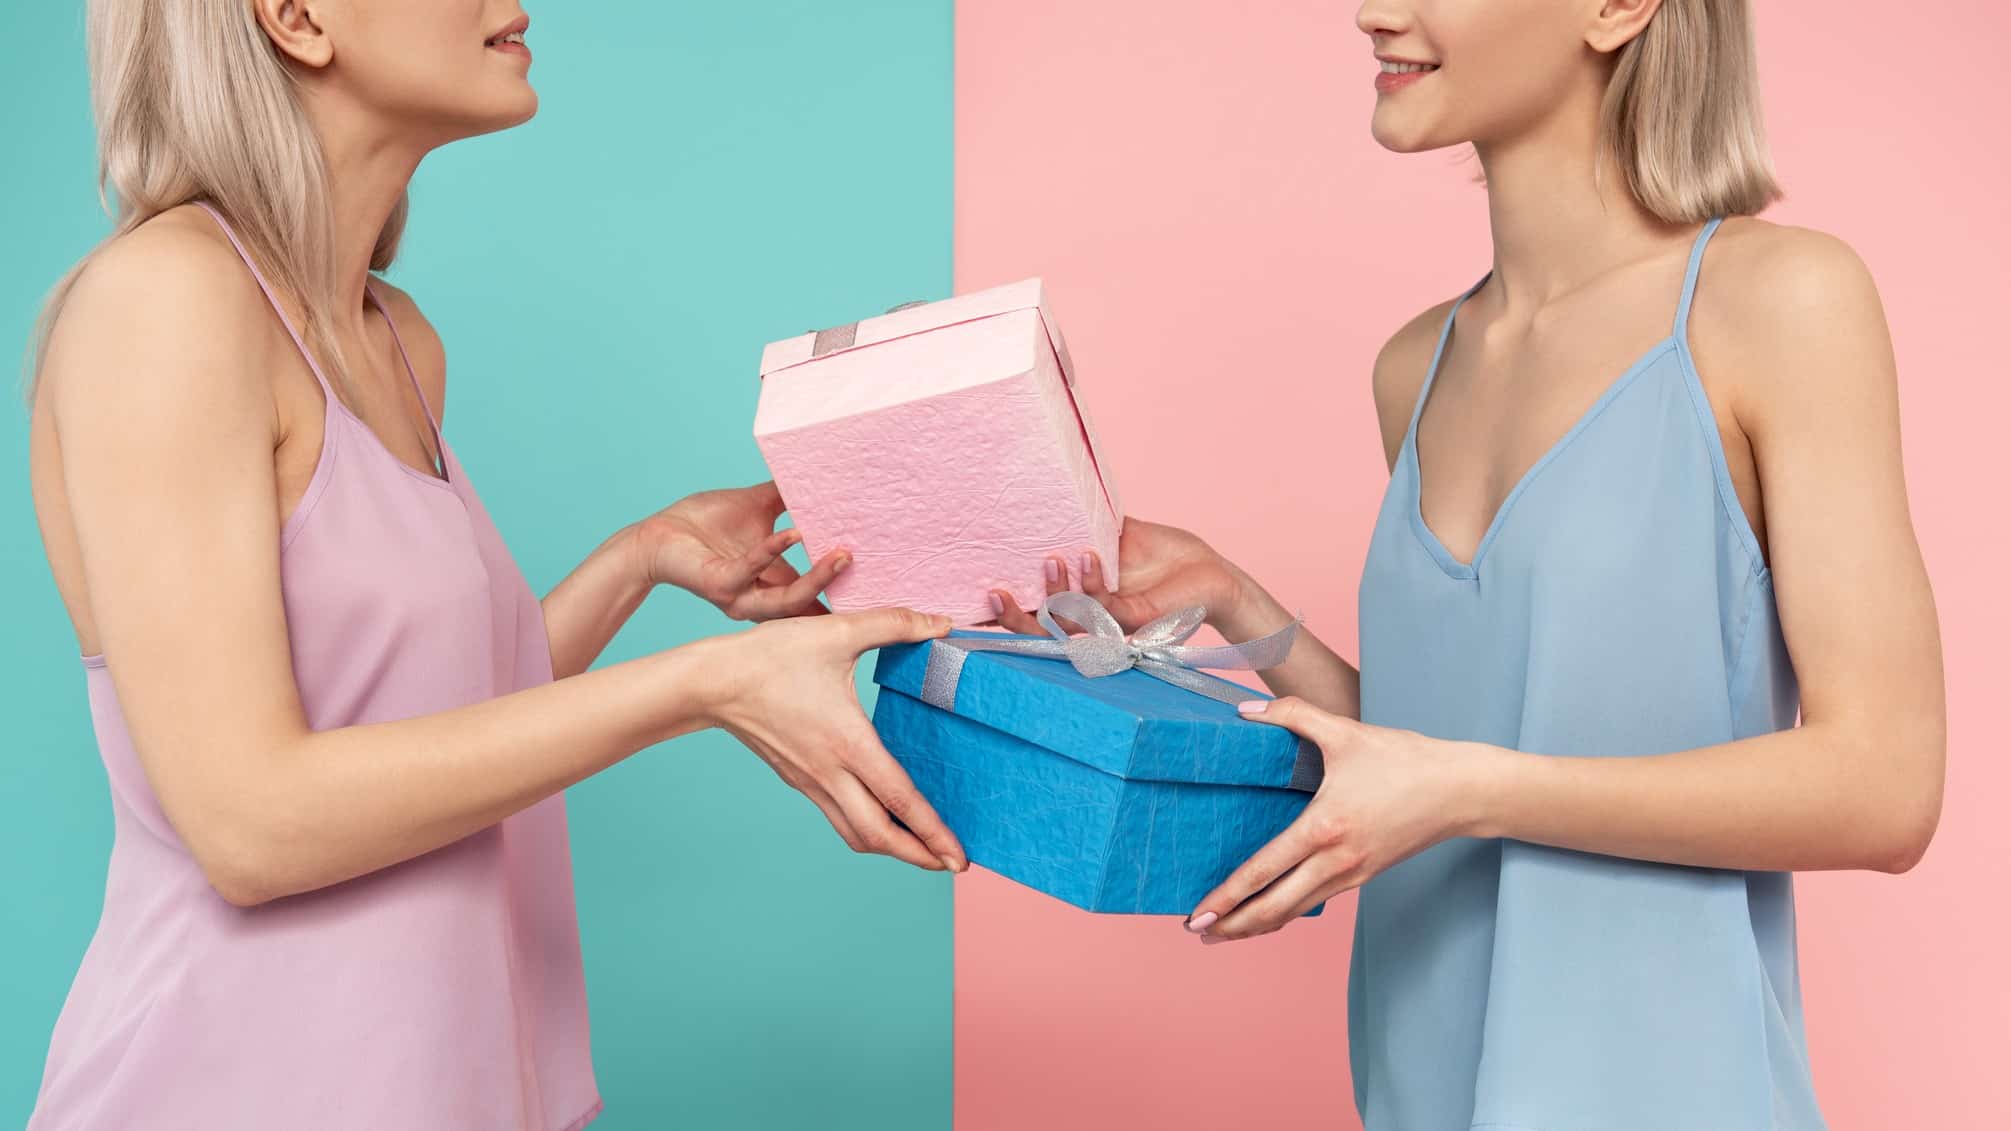 Two women exchange gifts.